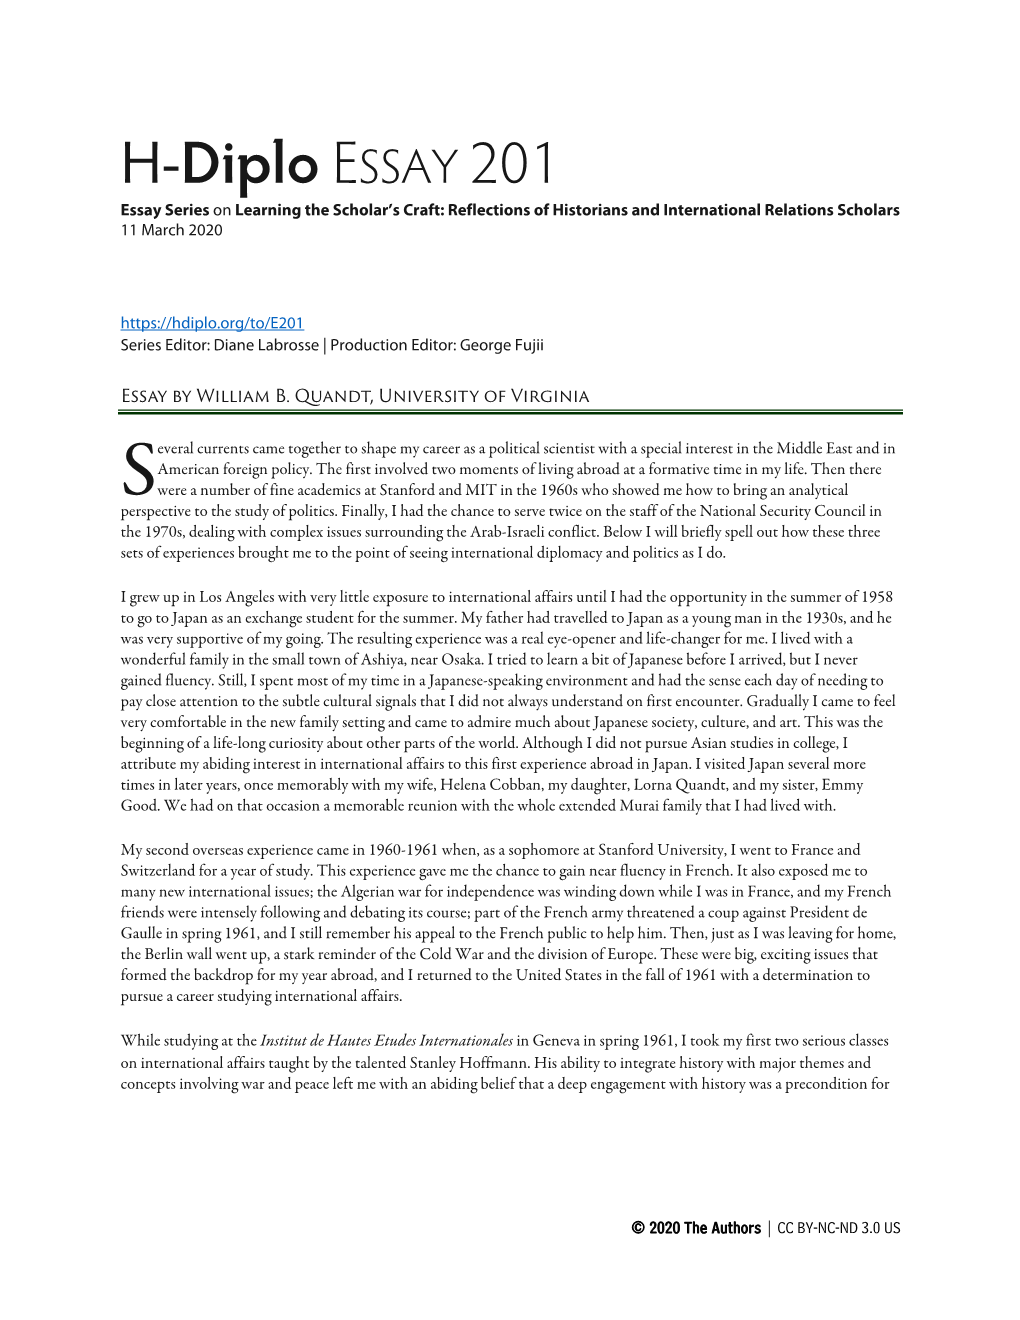 H-Diplo ESSAY 201 Essay Series on Learning the Scholar’S Craft: Reflections of Historians and International Relations Scholars 11 March 2020